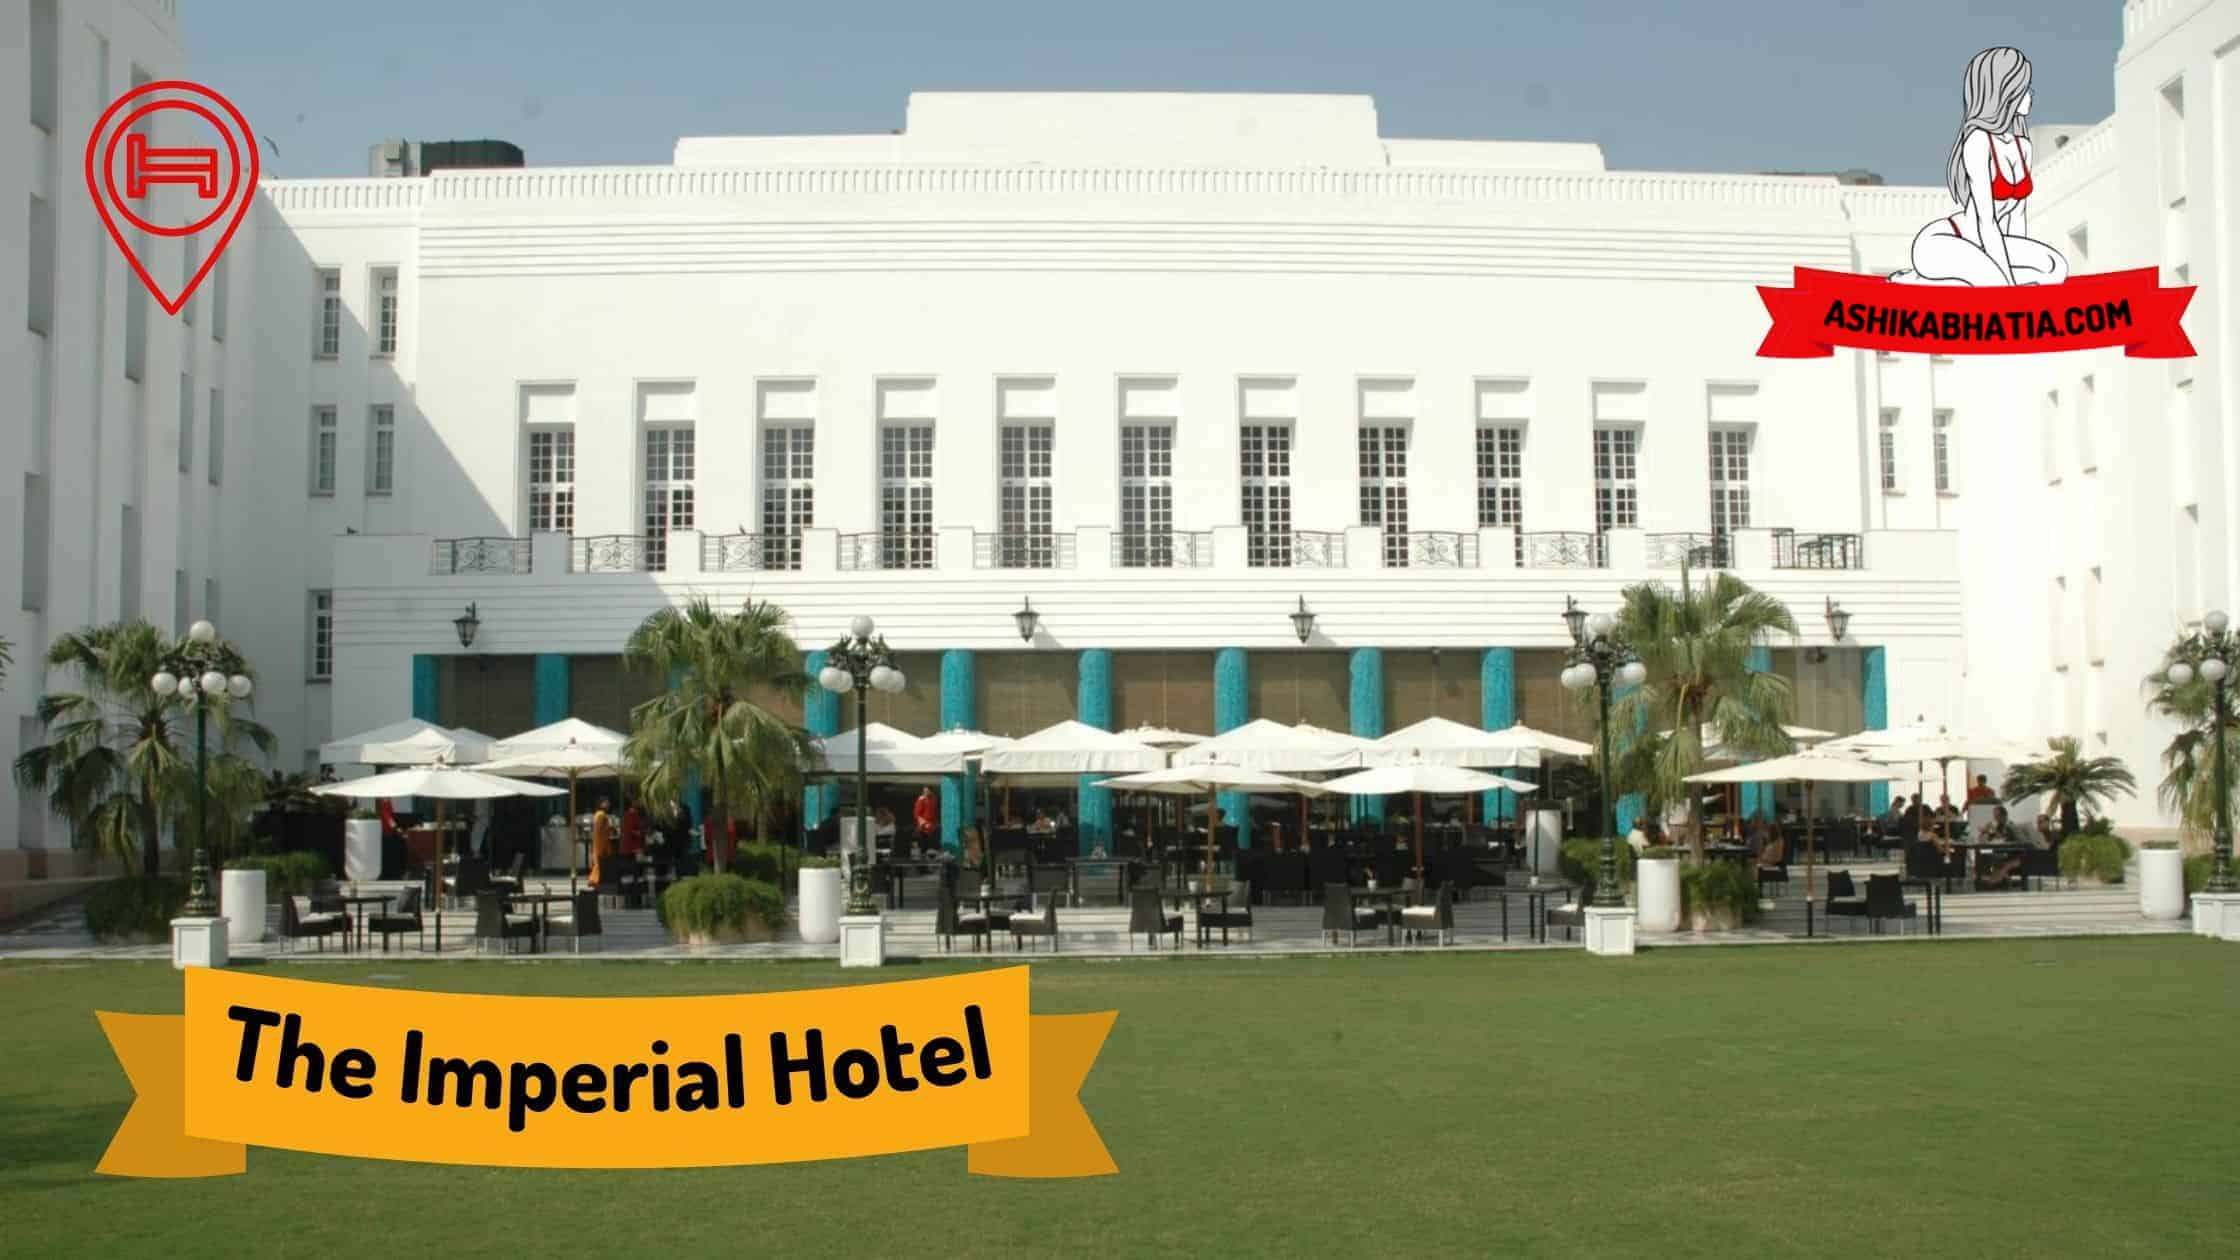 The Imperial Hotel Escorts